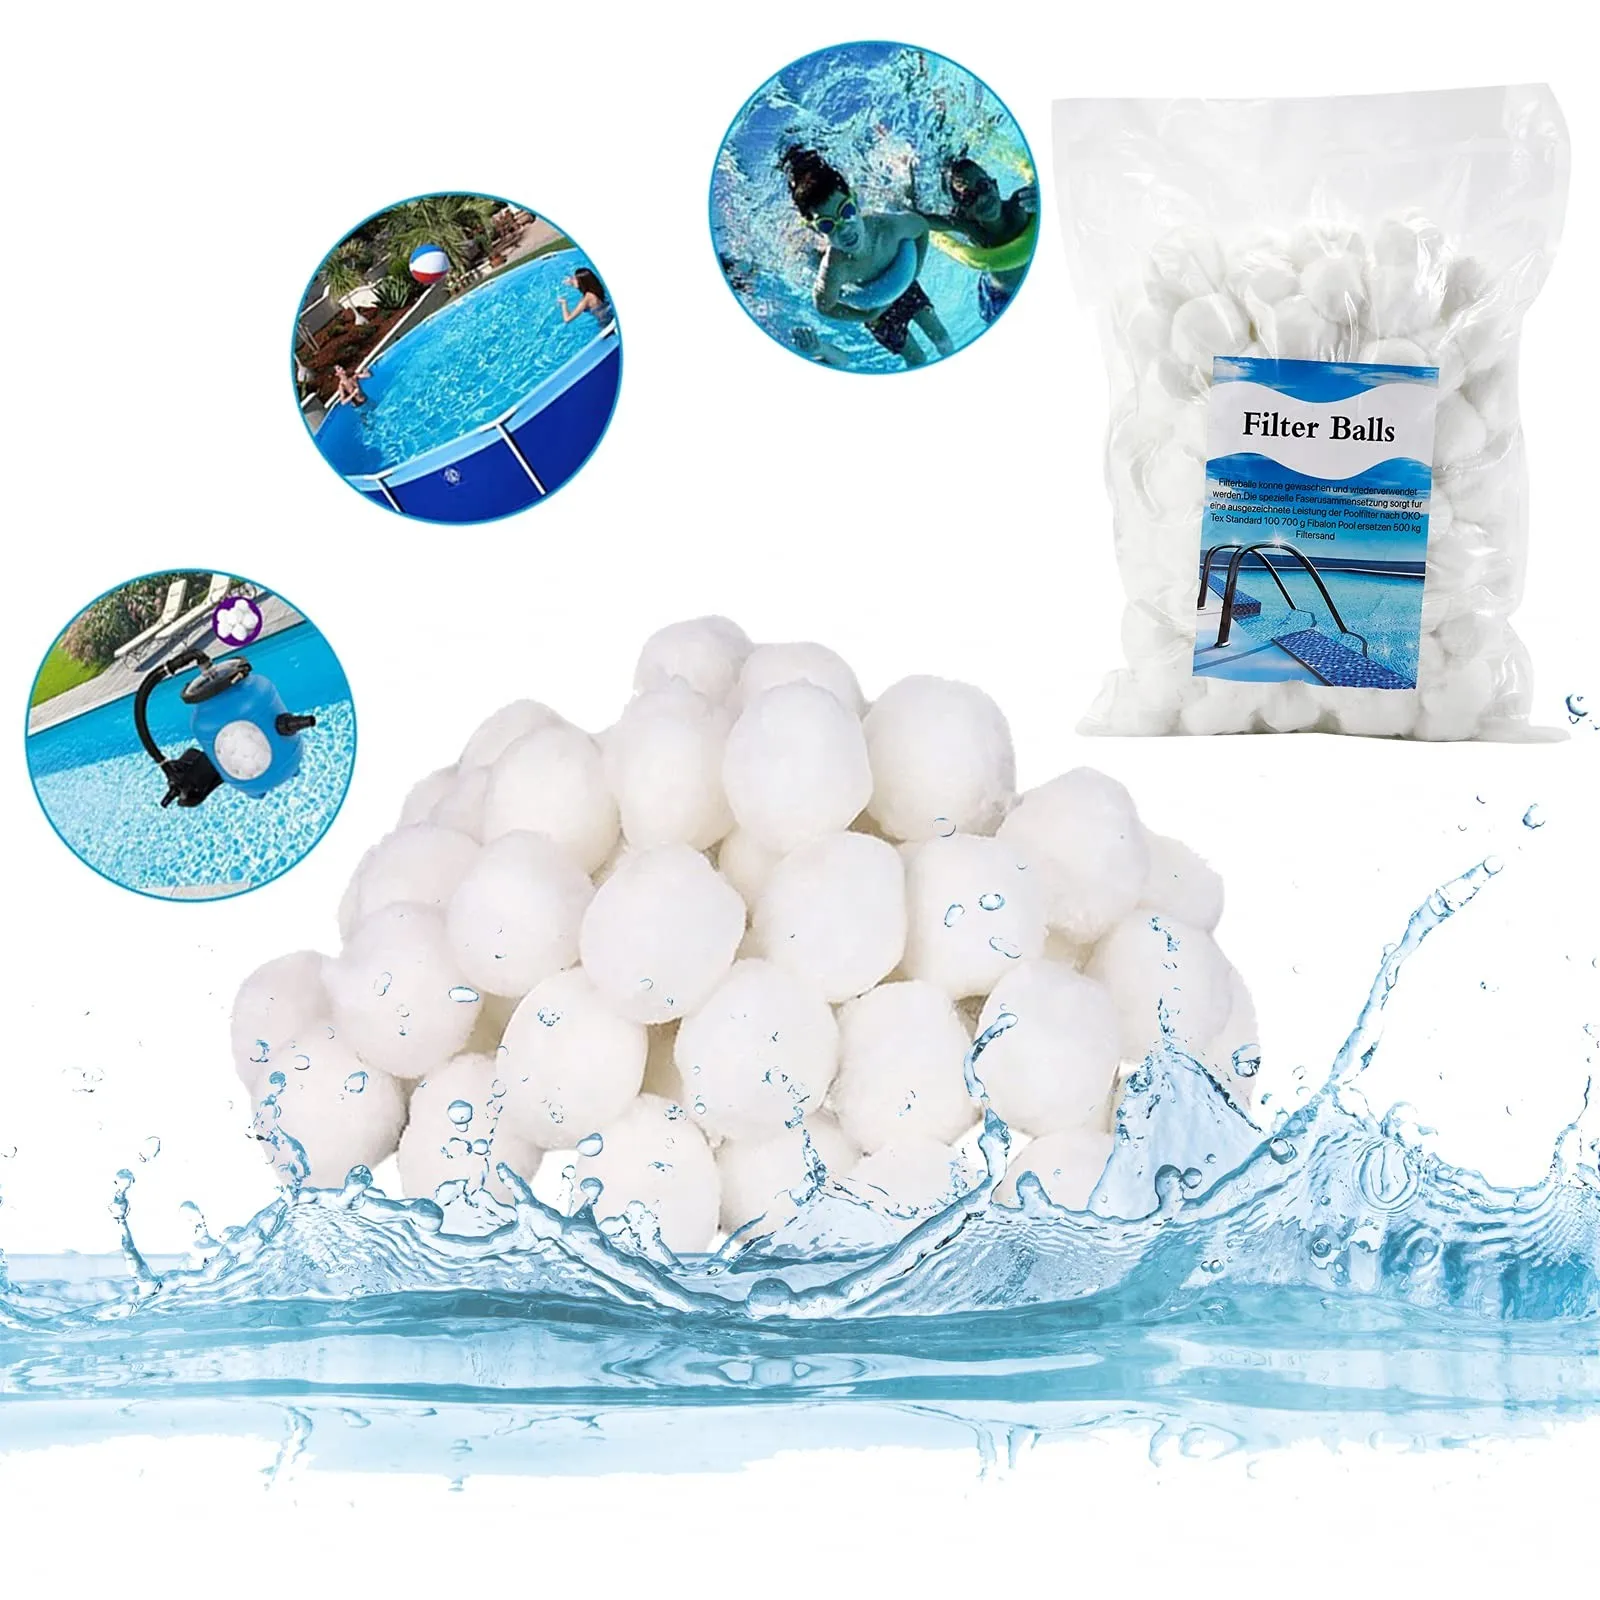 Does Using Filter Balls Keep Your Pool Sparkling Clean: The 10 Best Ways To Maintain Your Pool